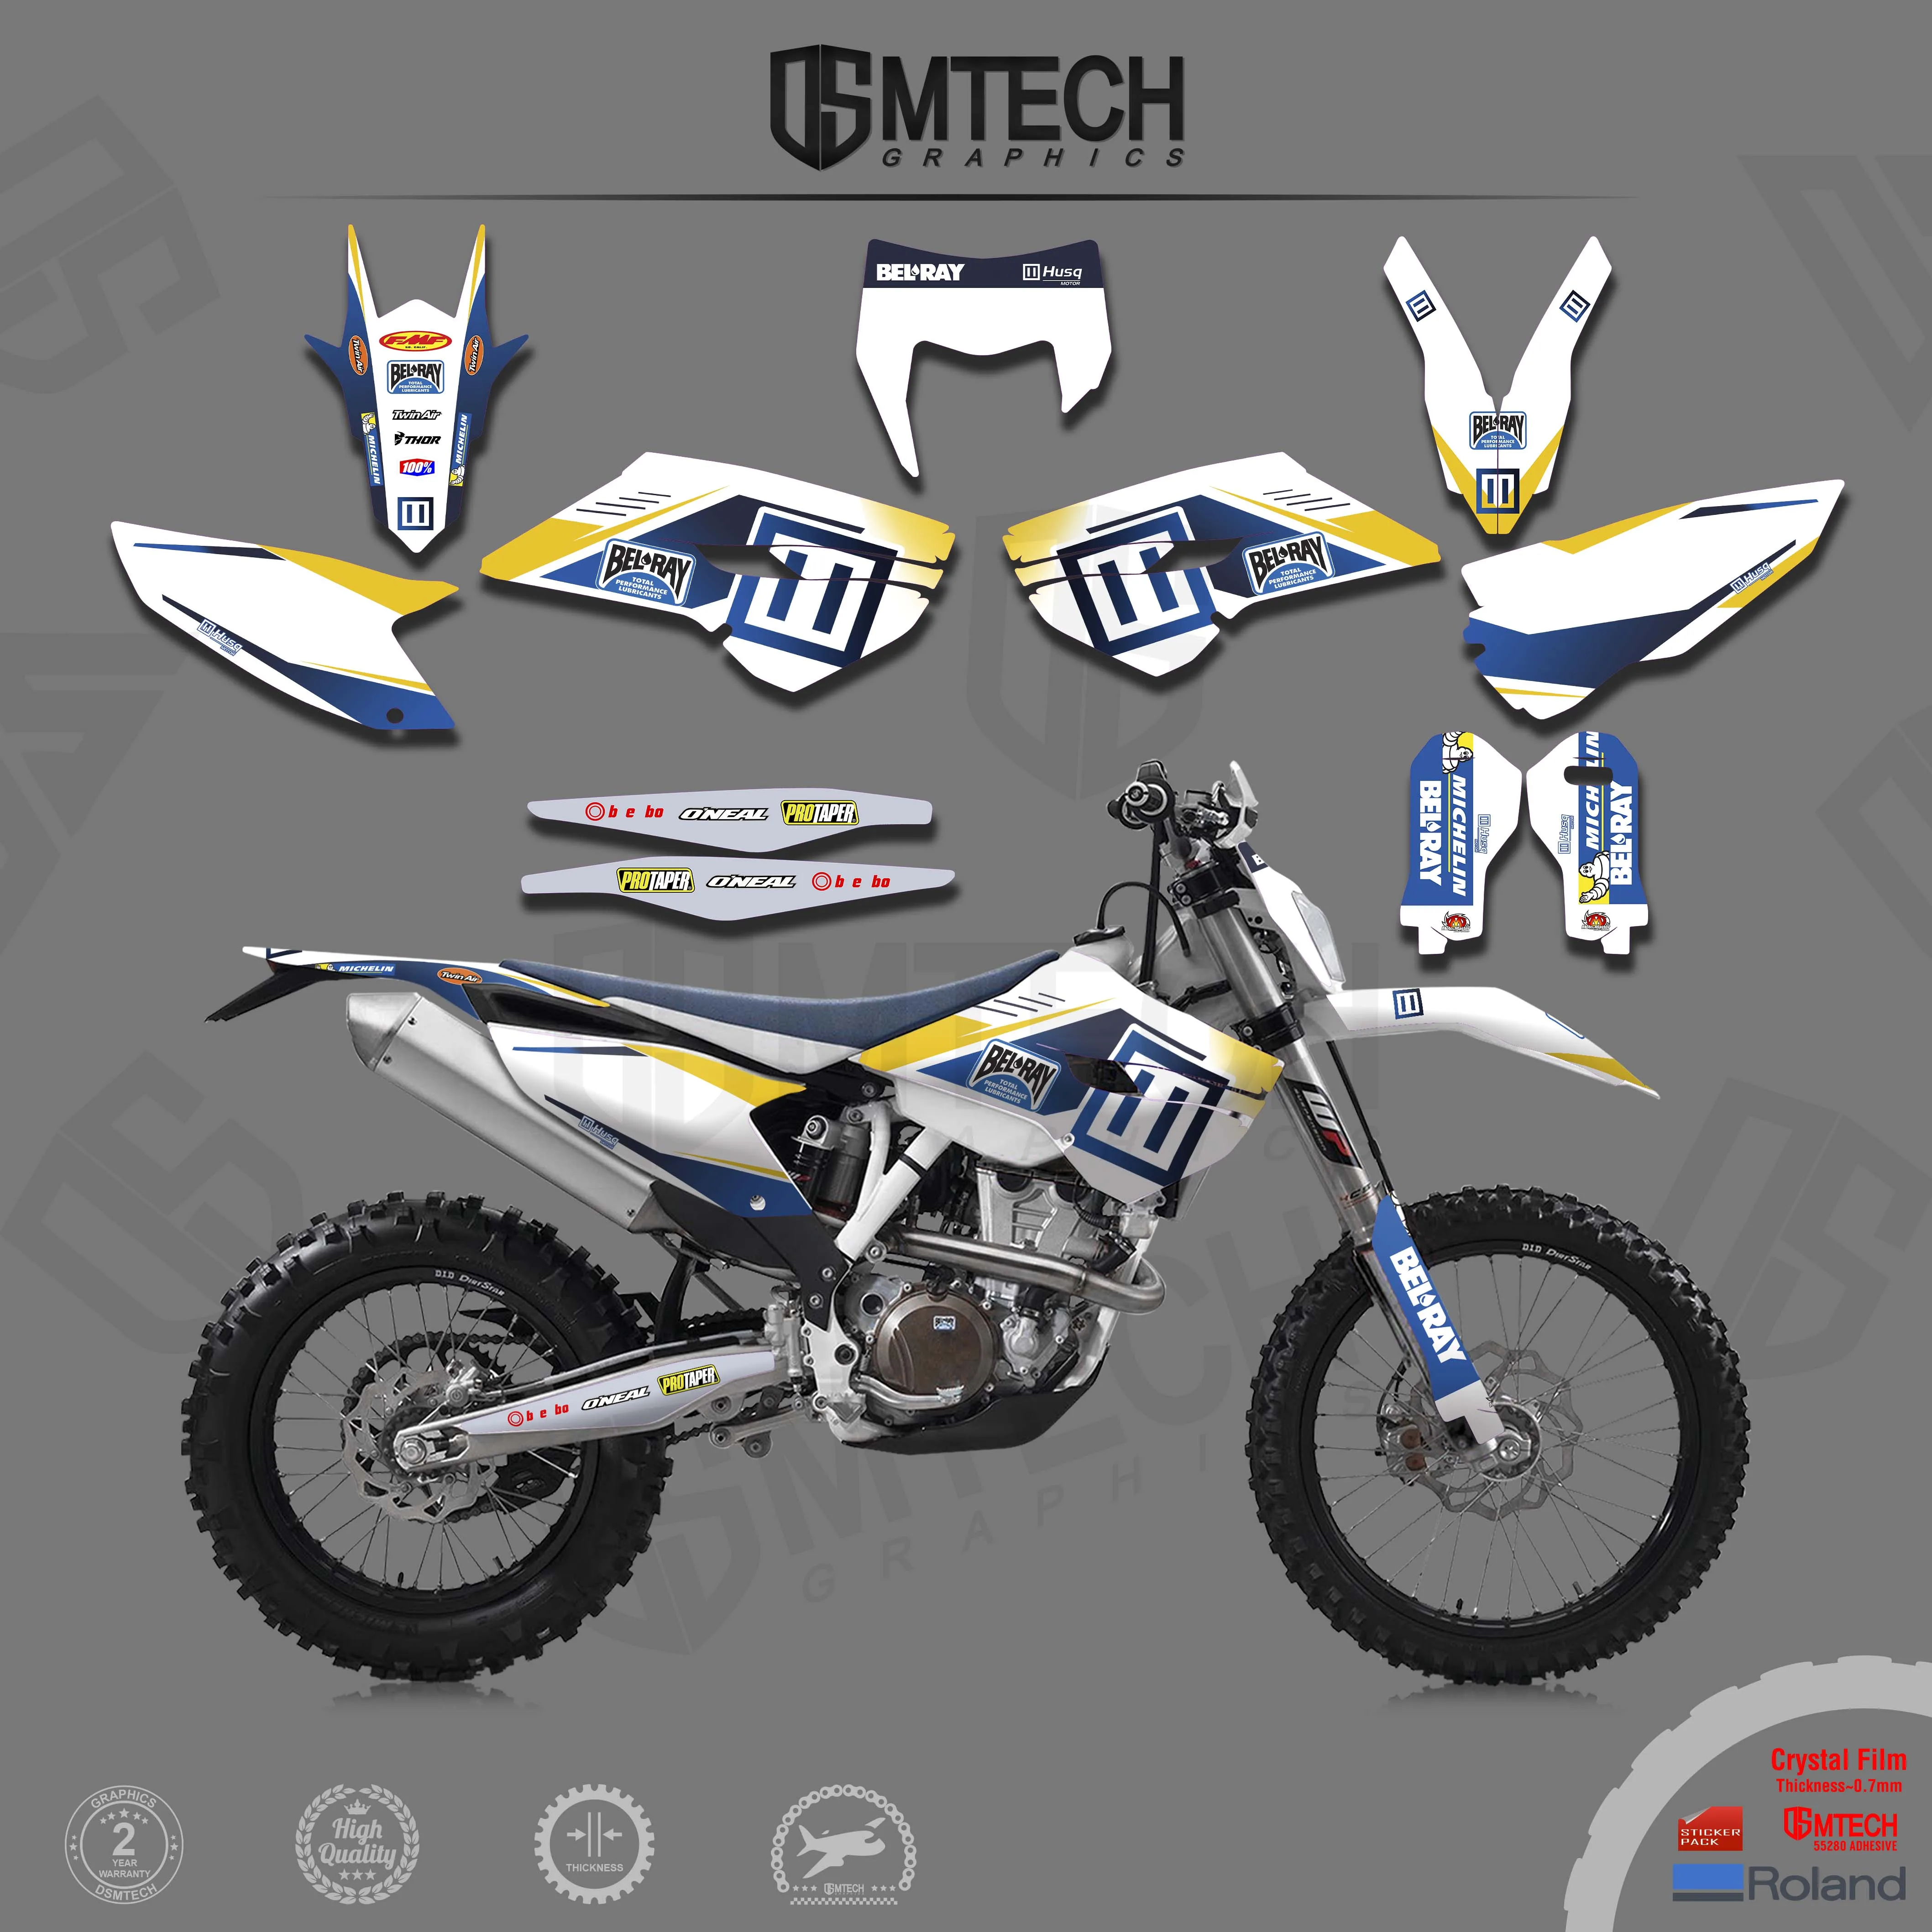 DSMTECH team combination graphic decal sticker be suitable for Husqvarna 2014-2015 TC-FC 2014-2016 TE-FE 002